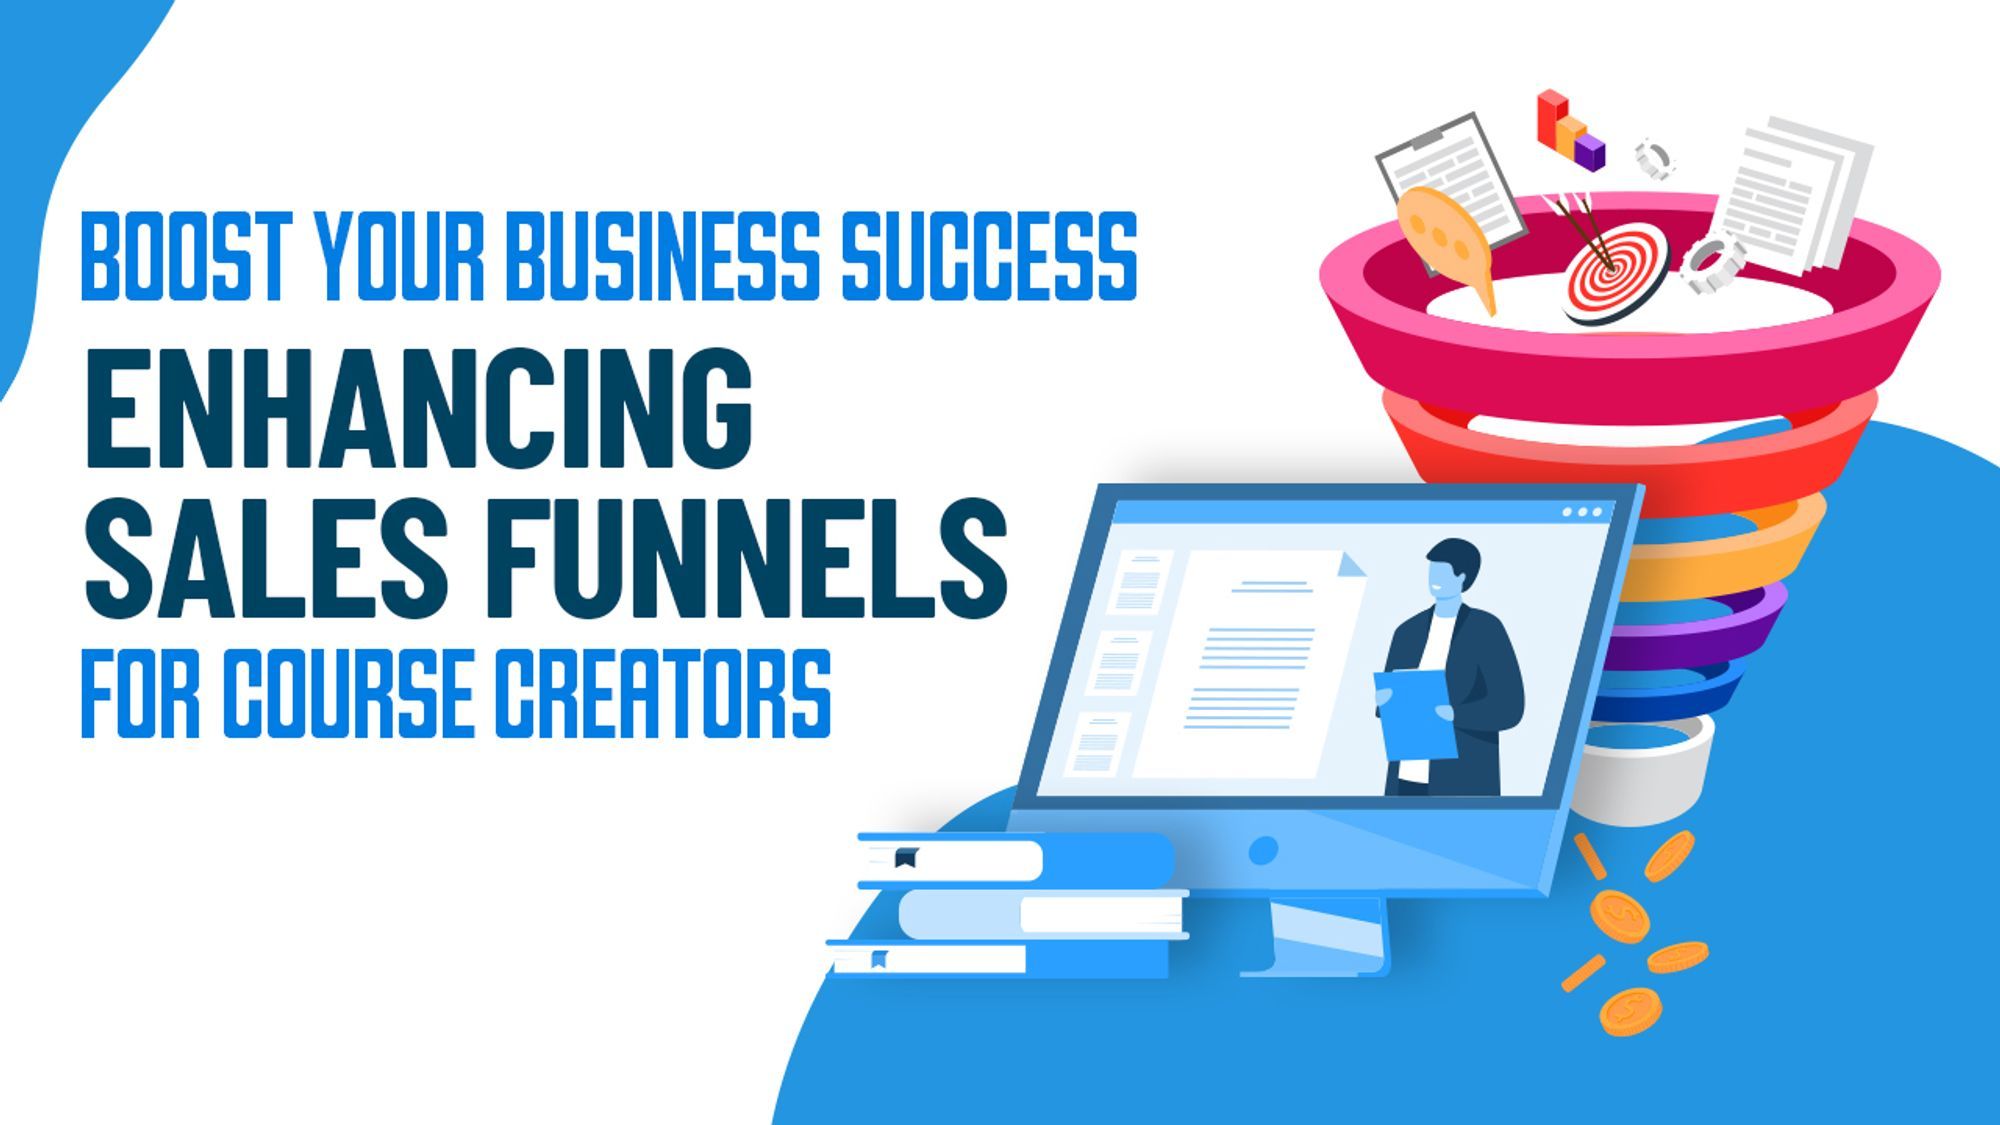 Boost-Your-Business-Success-Enhancing-Sales-Funnels-for-Course-Creators